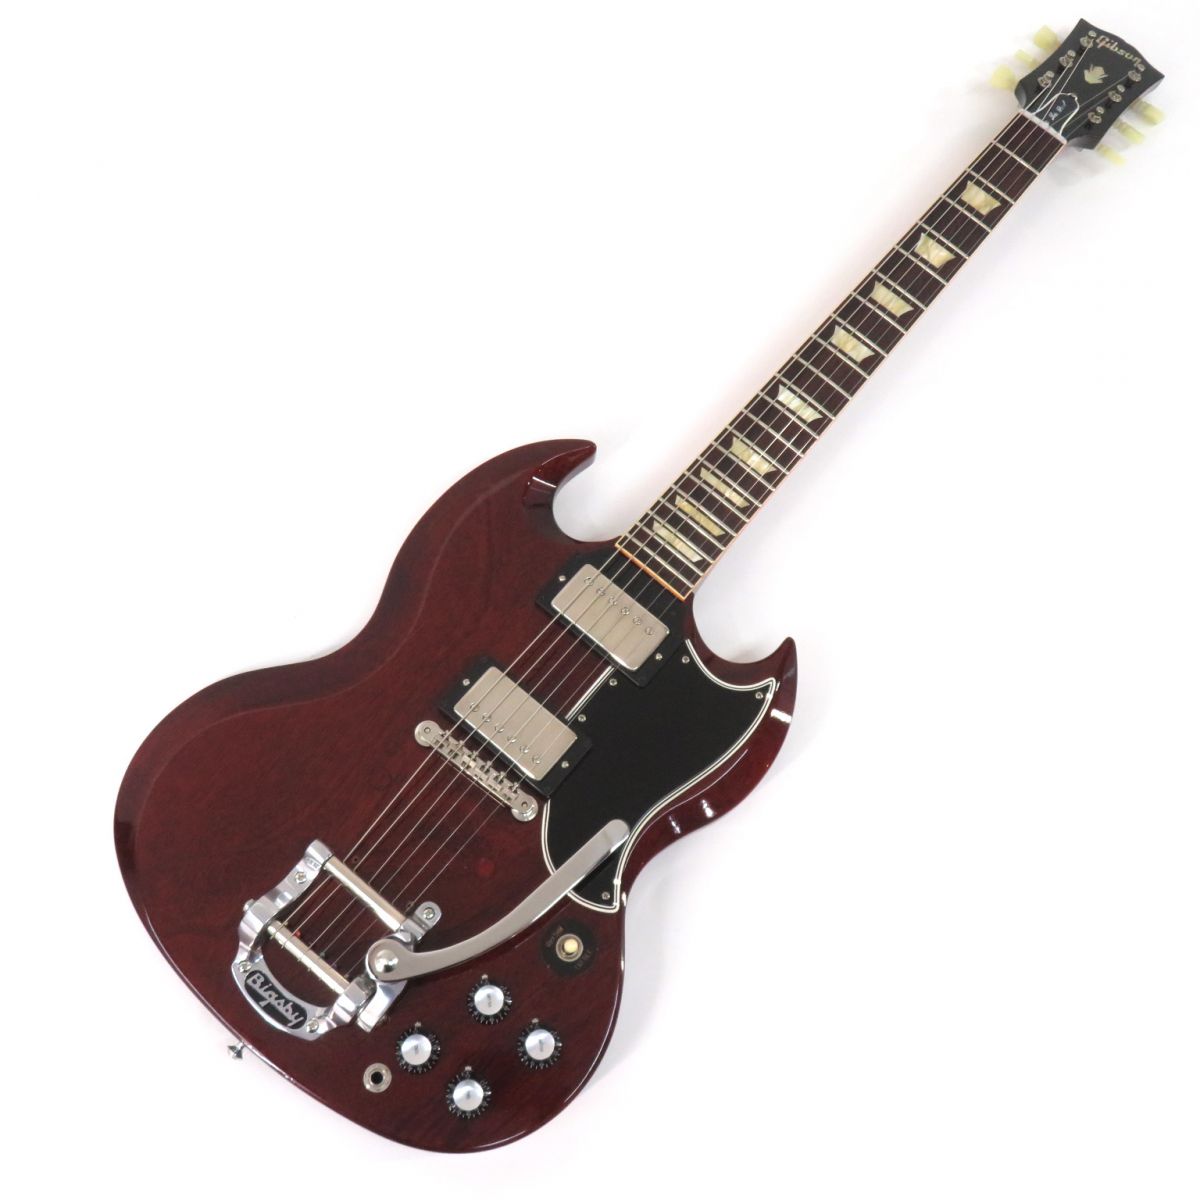 Gibson【Historic Collection 1961 SG Standard Reissue Mod】チェリー【中古/エレキギター/2000年製/ギブソン】岡山店